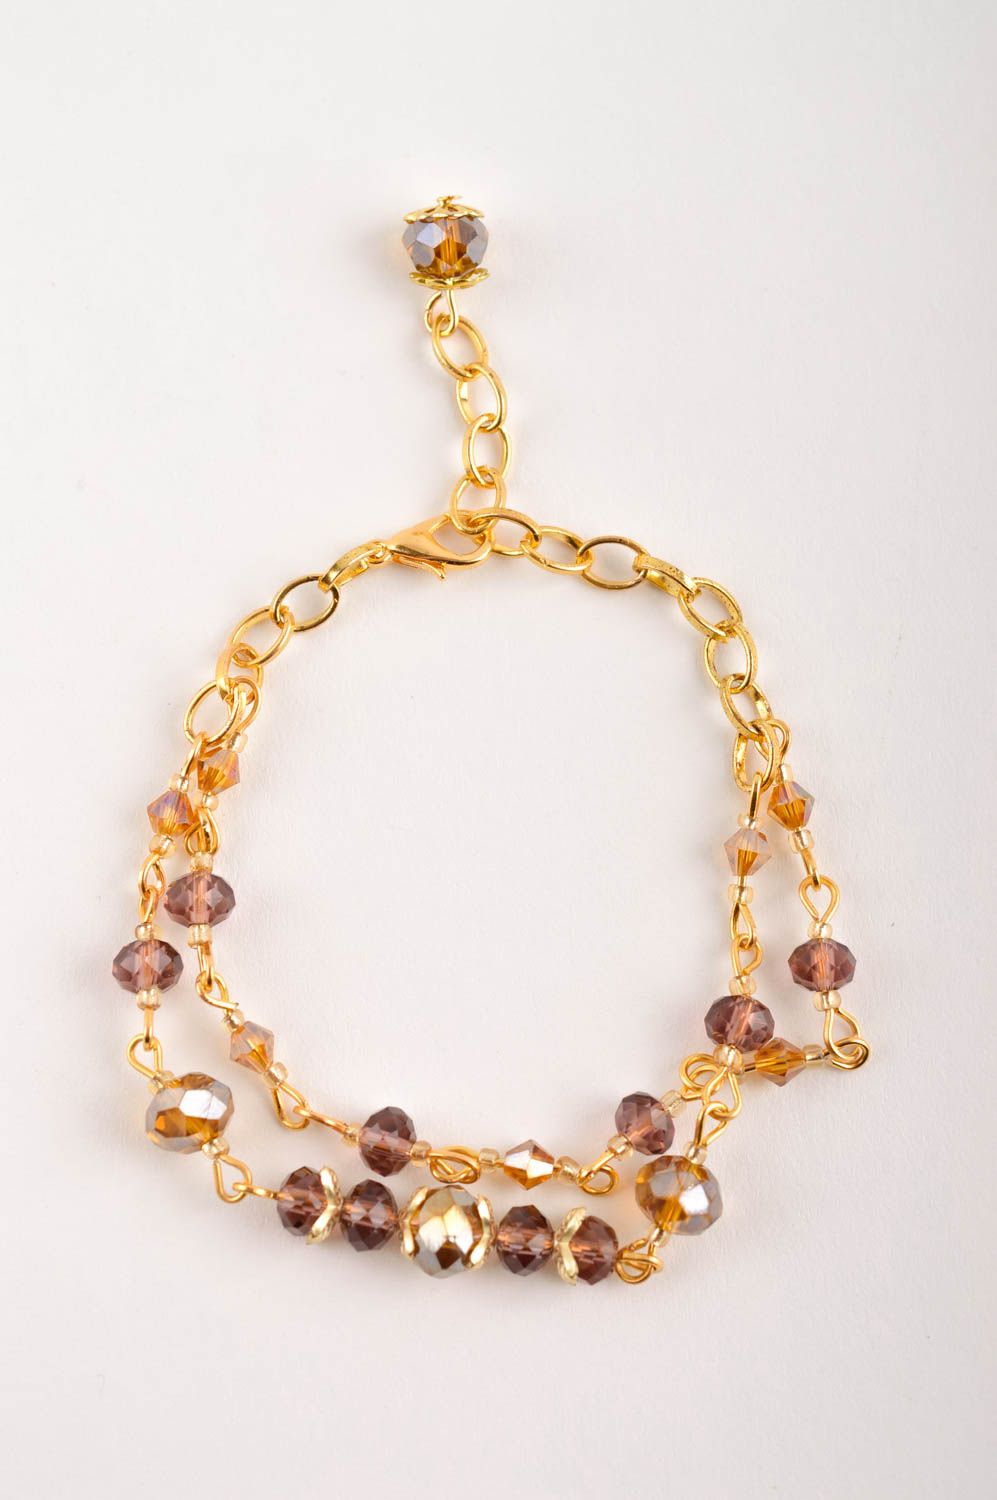 Chain bracelet in golden color with brown beads for girls photo 2